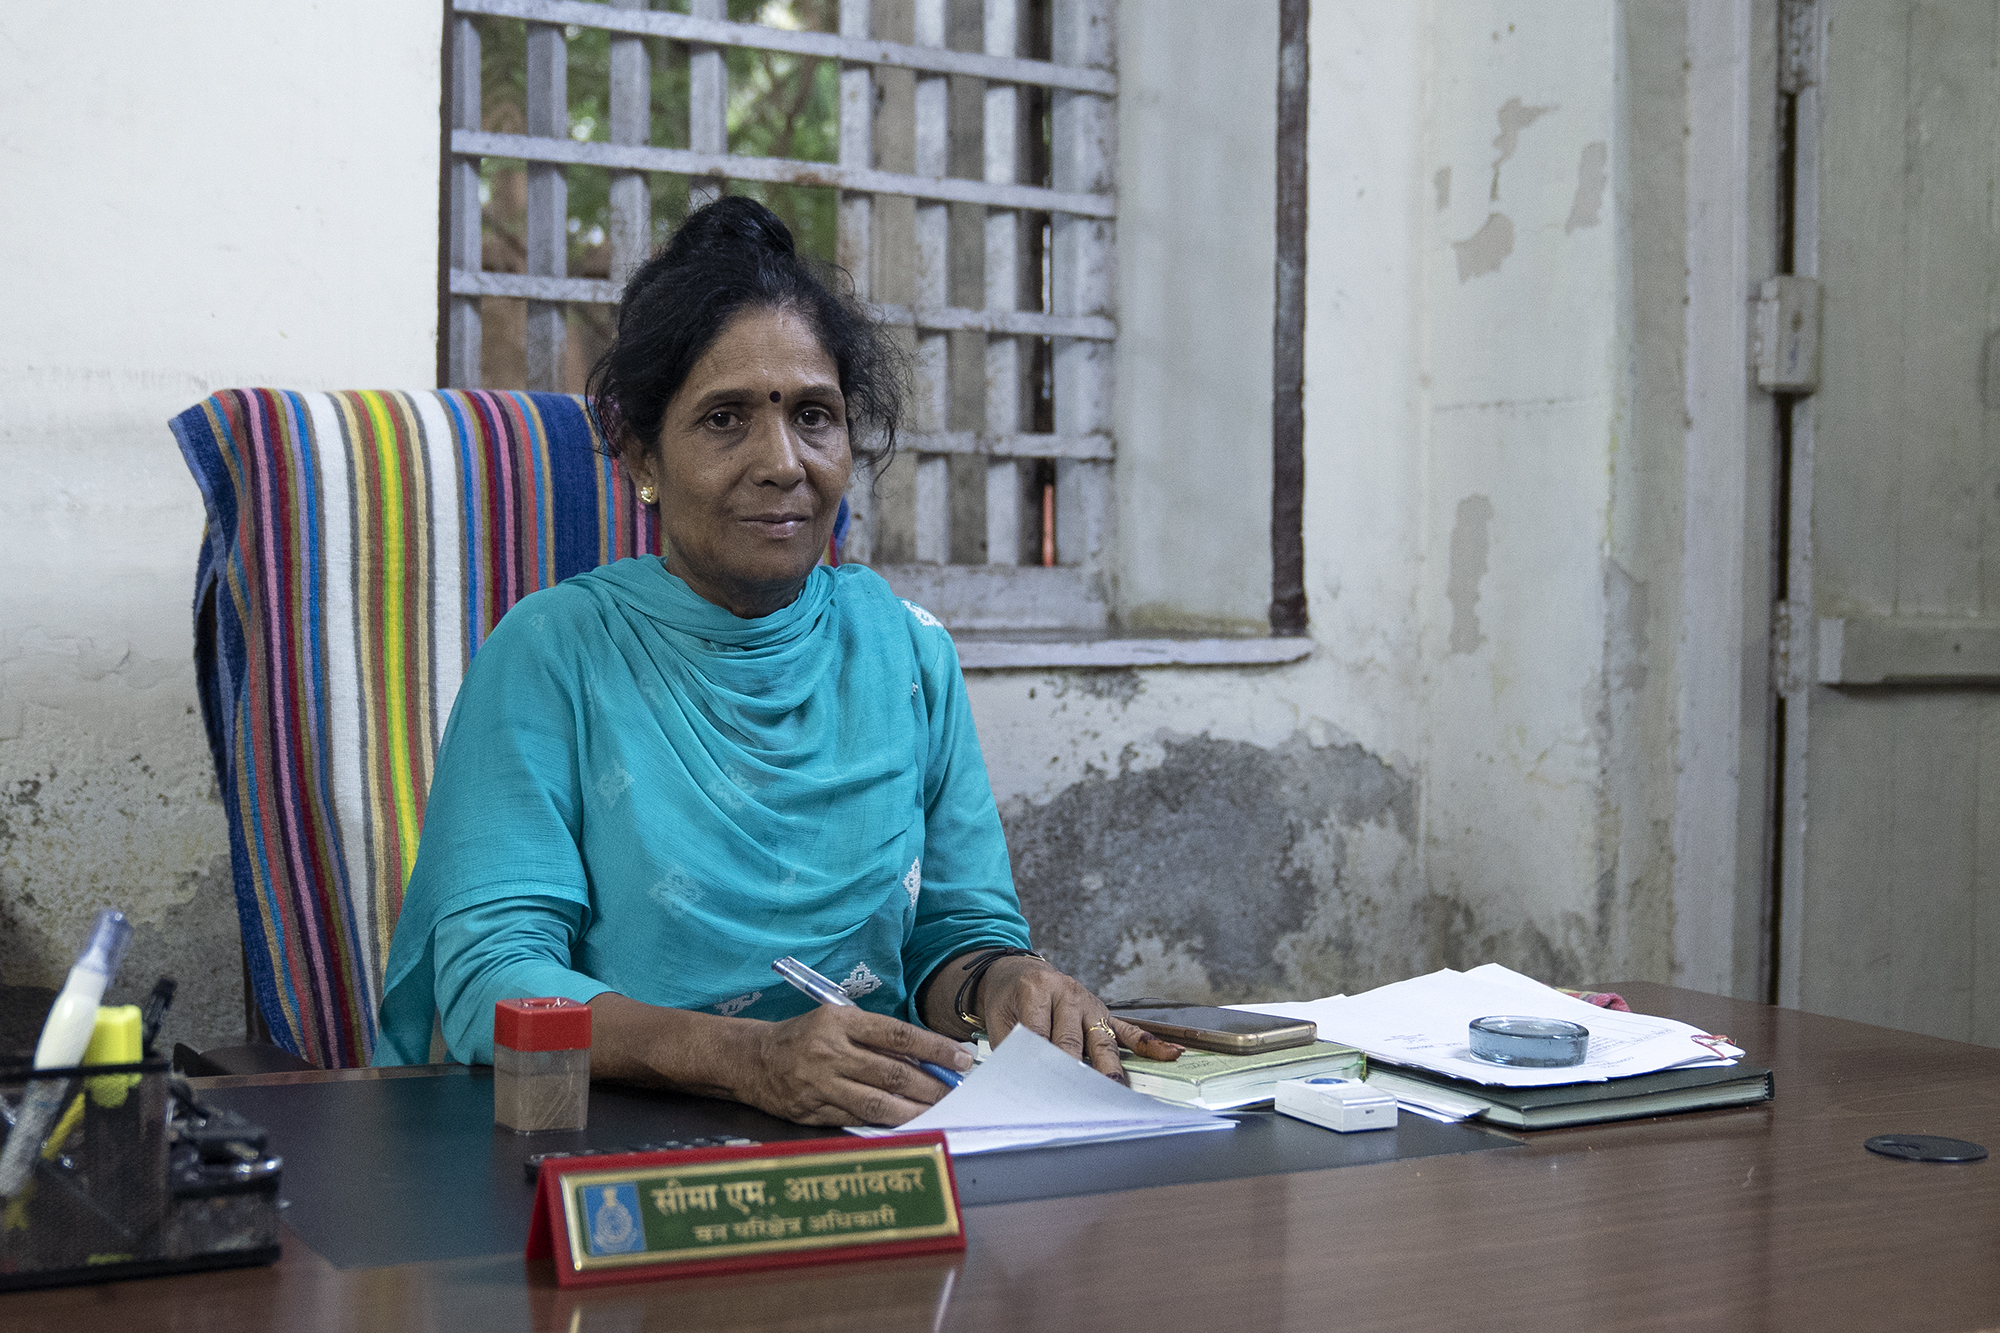 Seema Adgaonkar at Thane Forest Department’s office in Thane, Maharashtra. She is a Range Forest Officer with the Mumbai Mangrove Conservation Unit under the state’s Mangrove Cell. Image credit: Courtesy of Kartik Chandramouli